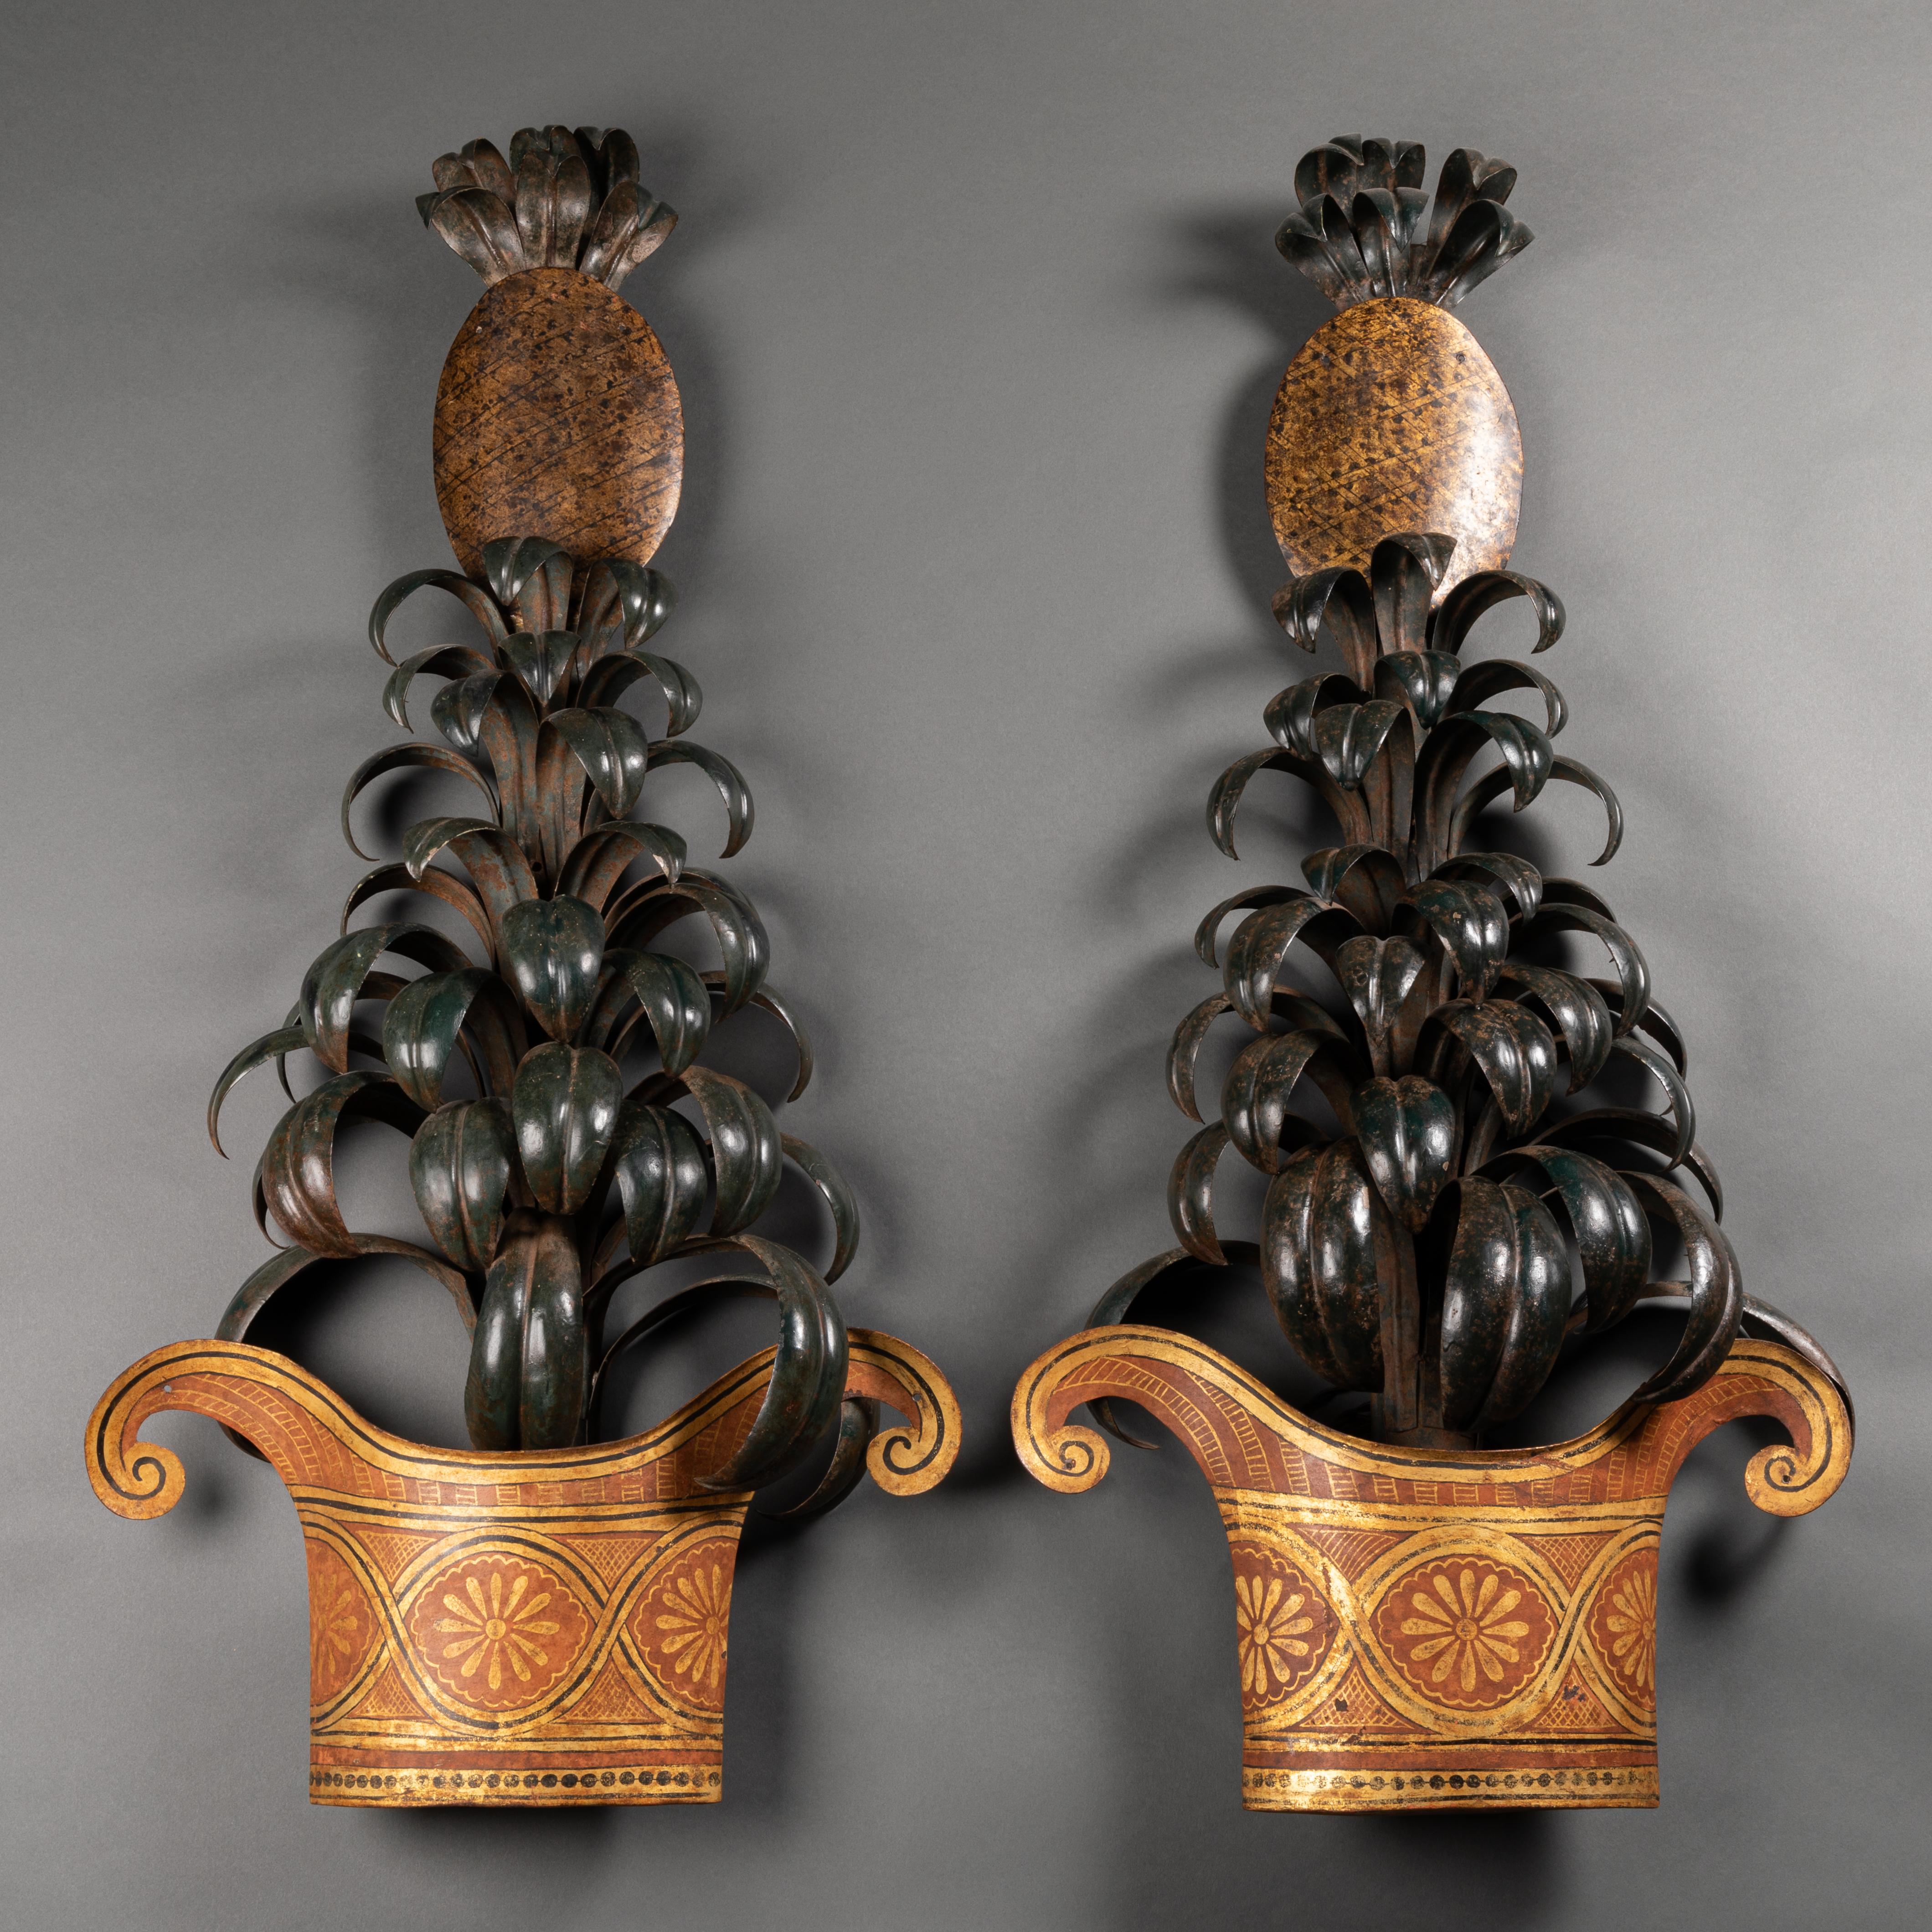 Pair of sheet iron sconces with vases and pineapples. Trompe l’oeil painting. Maison Jansen, circa 1950. Wired to the EU standard.